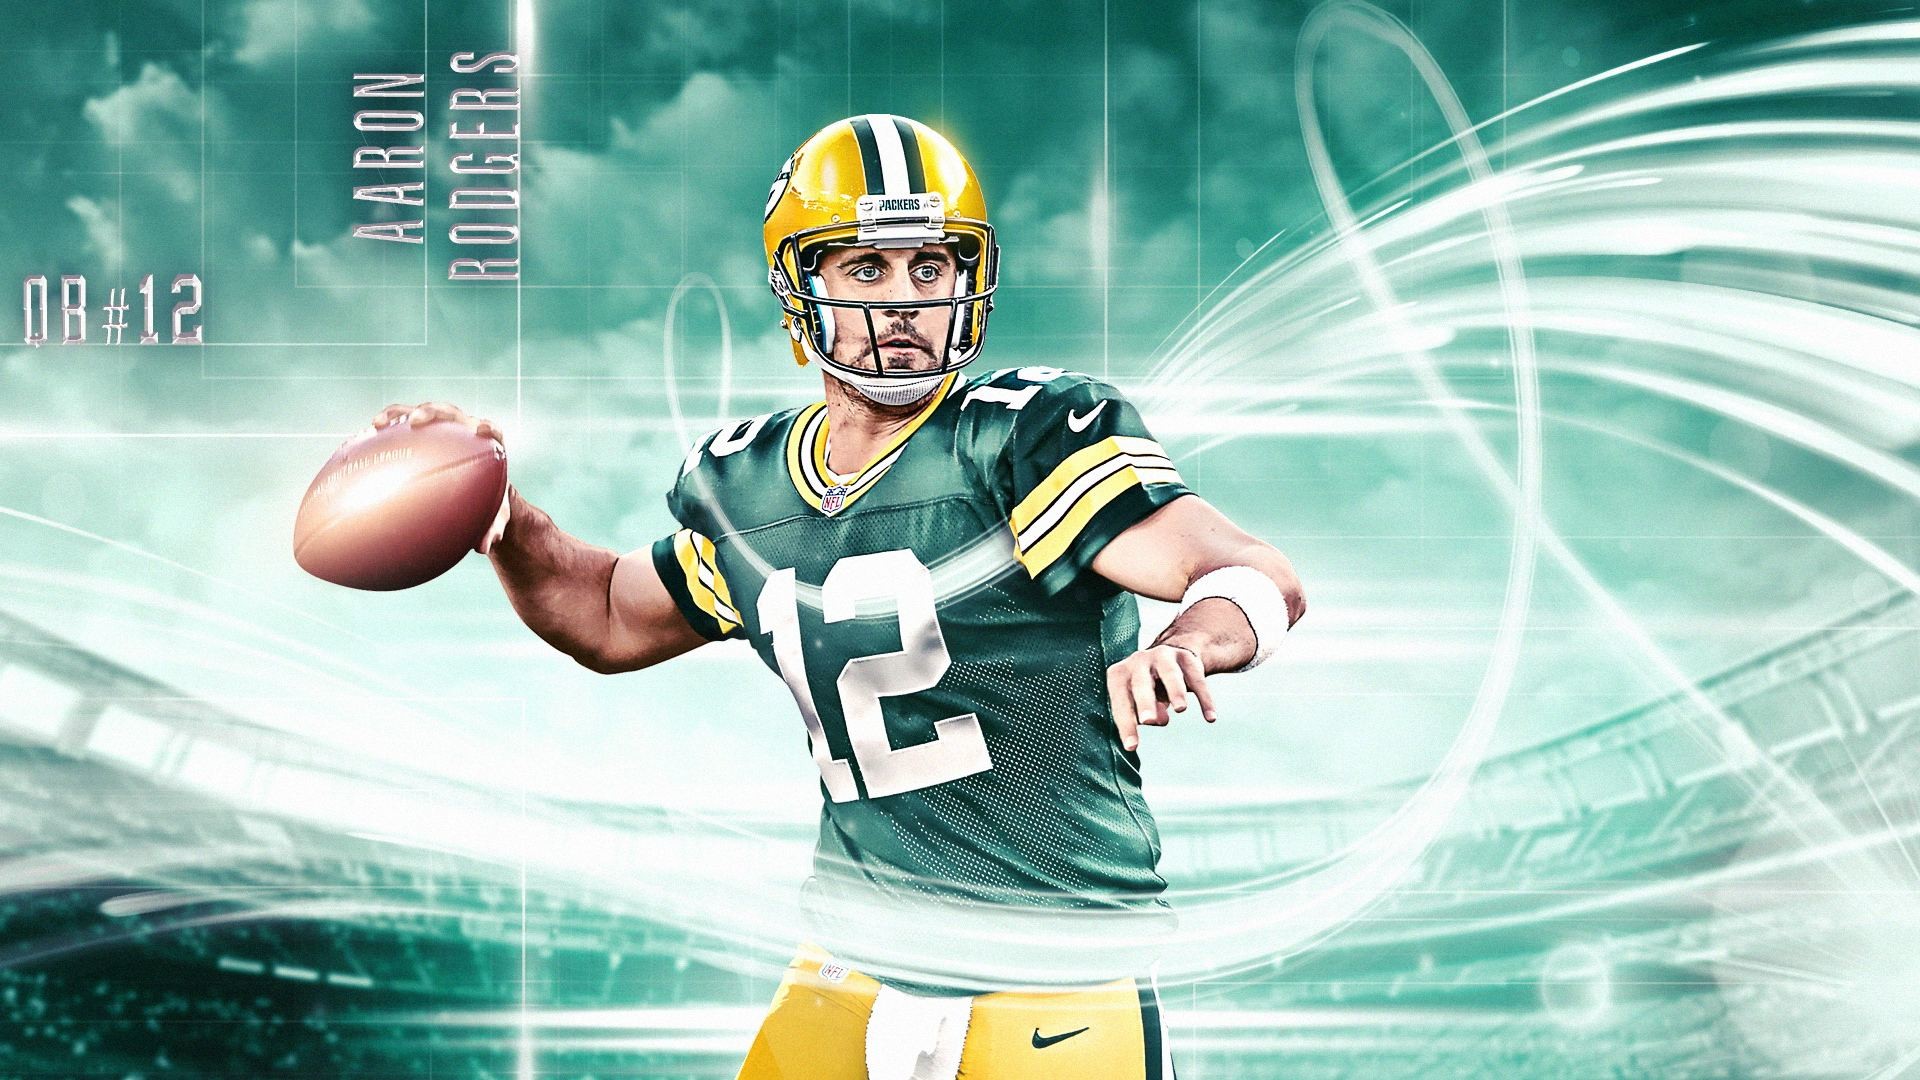 1920x1080 For Green Bay Packers Aaron Rodgers Wallpaper Green Bay Packers .